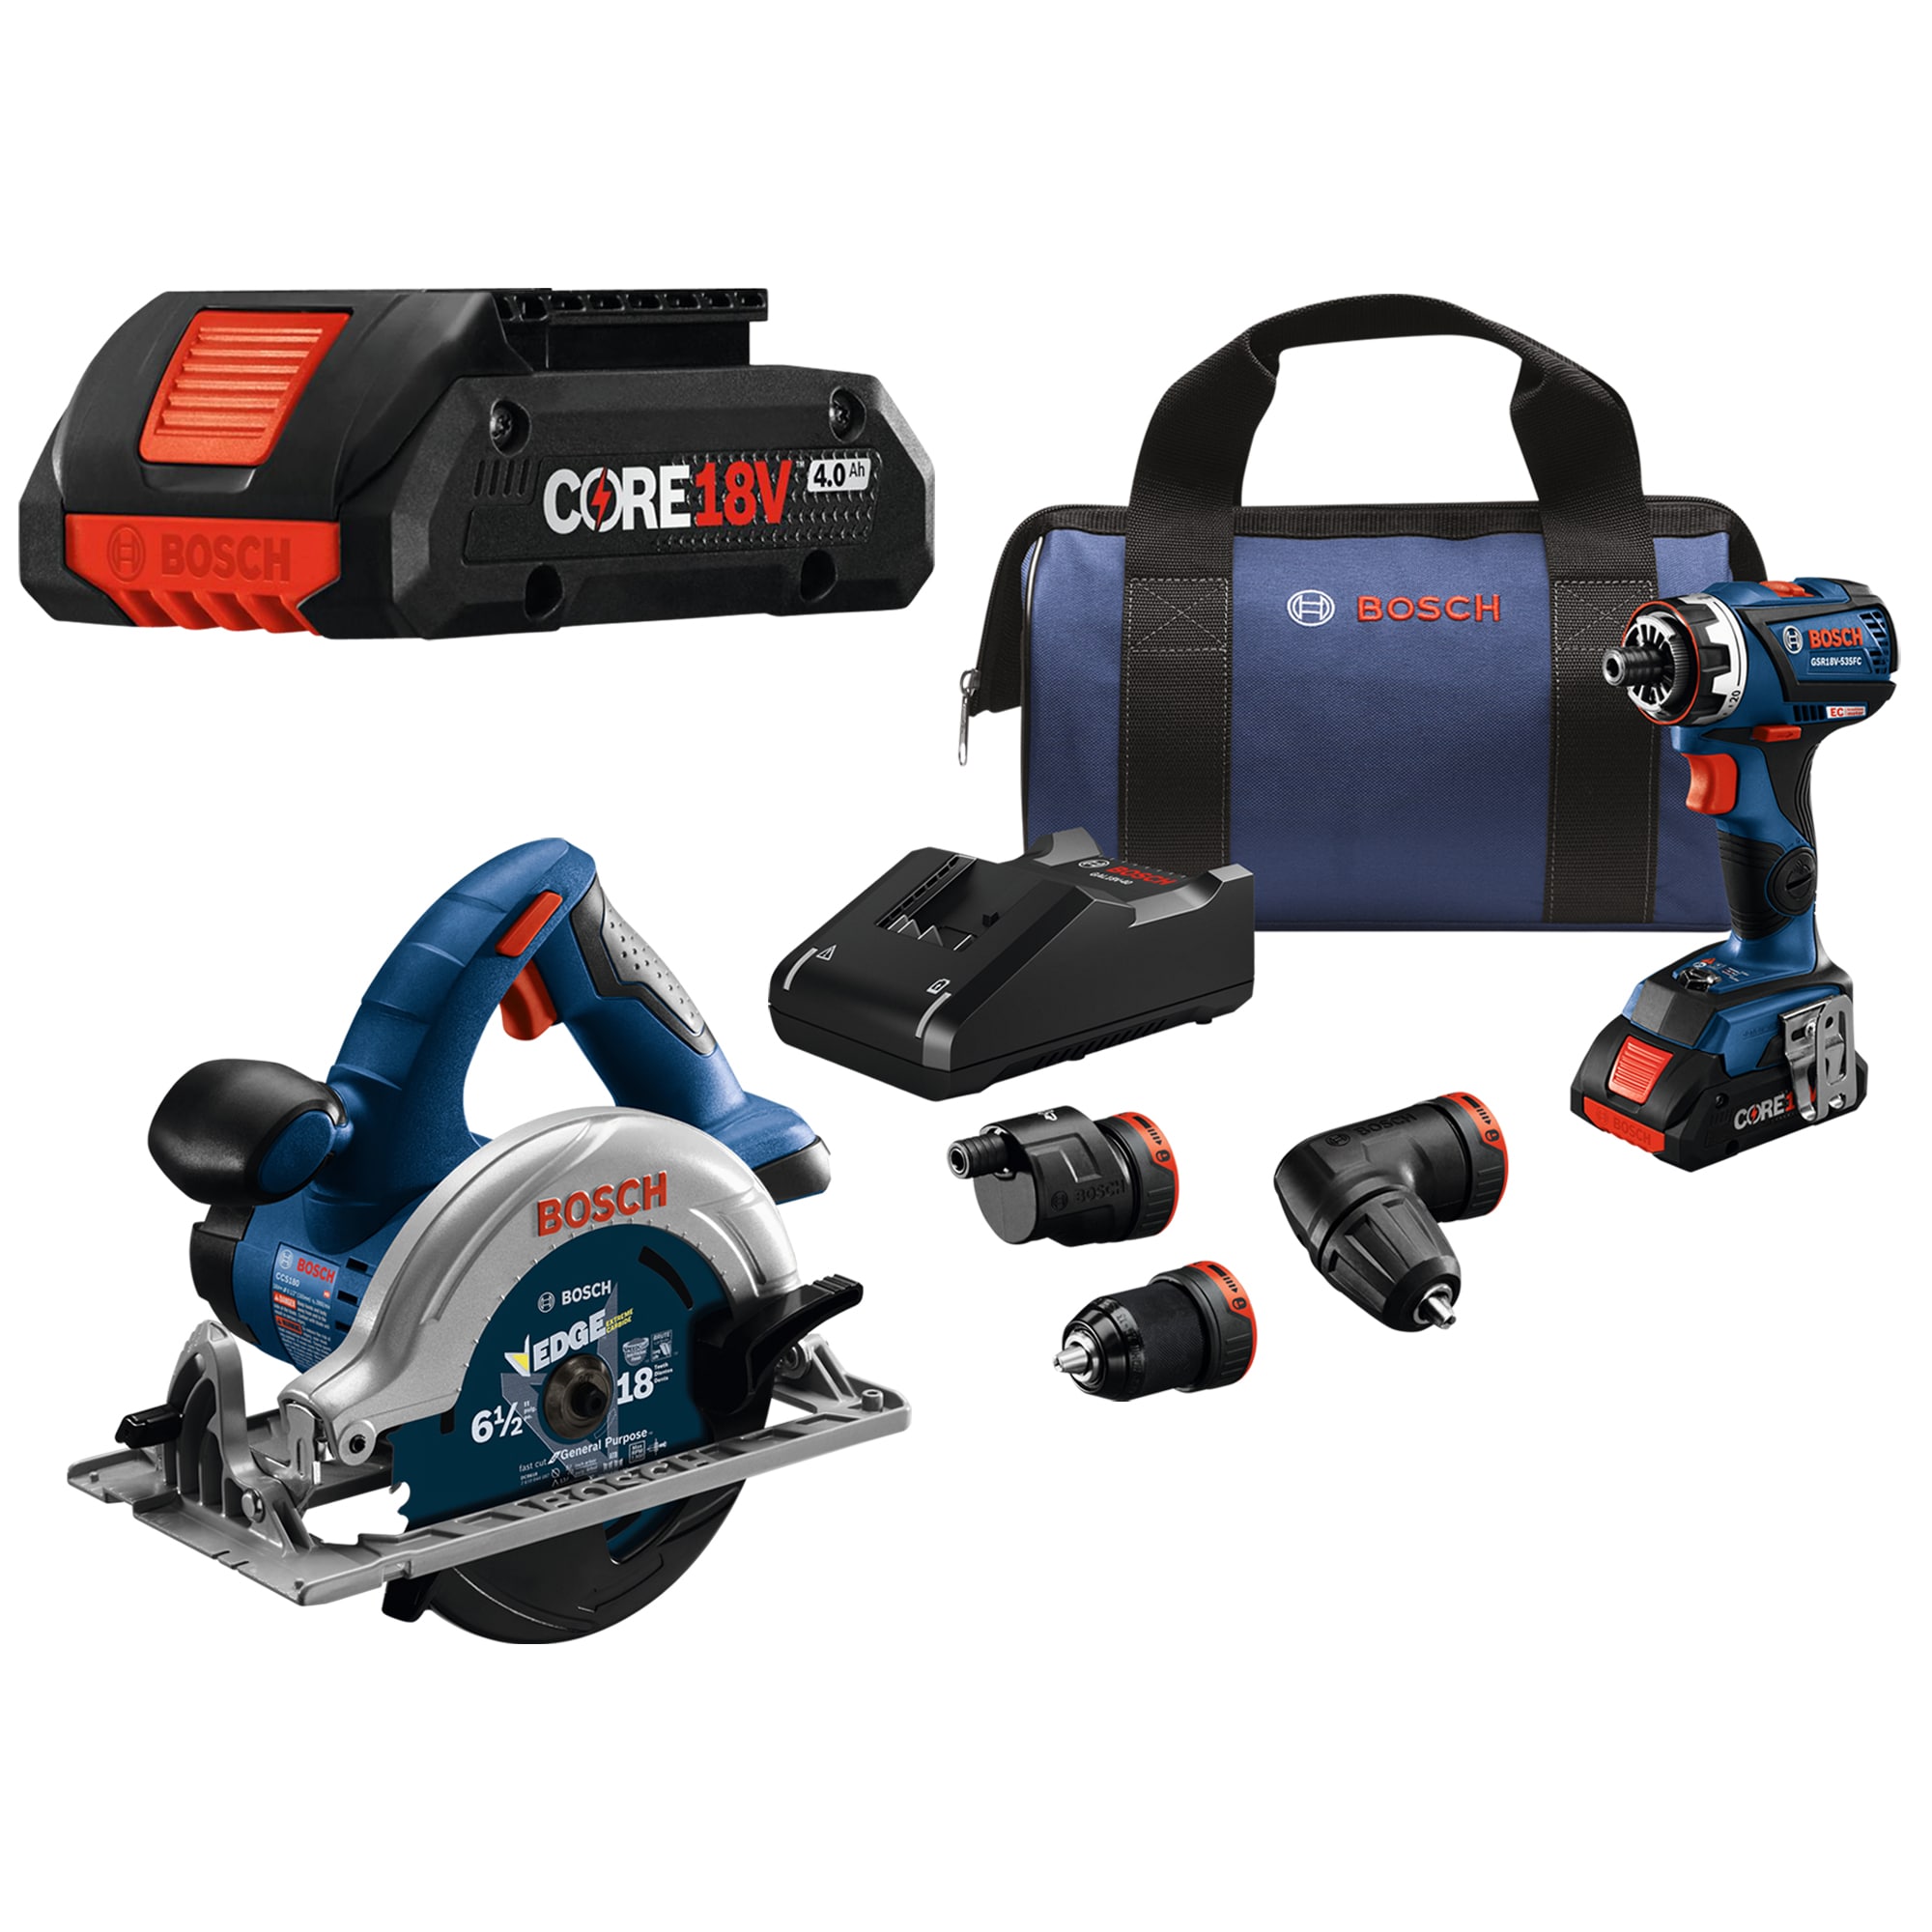 Bosch 18V Brushless 3-Tool Kit w/ Chameleon 5-in-1 Drill Driver/ Circular Saw/ 2x4.0ah Batteries with Charger and Bag